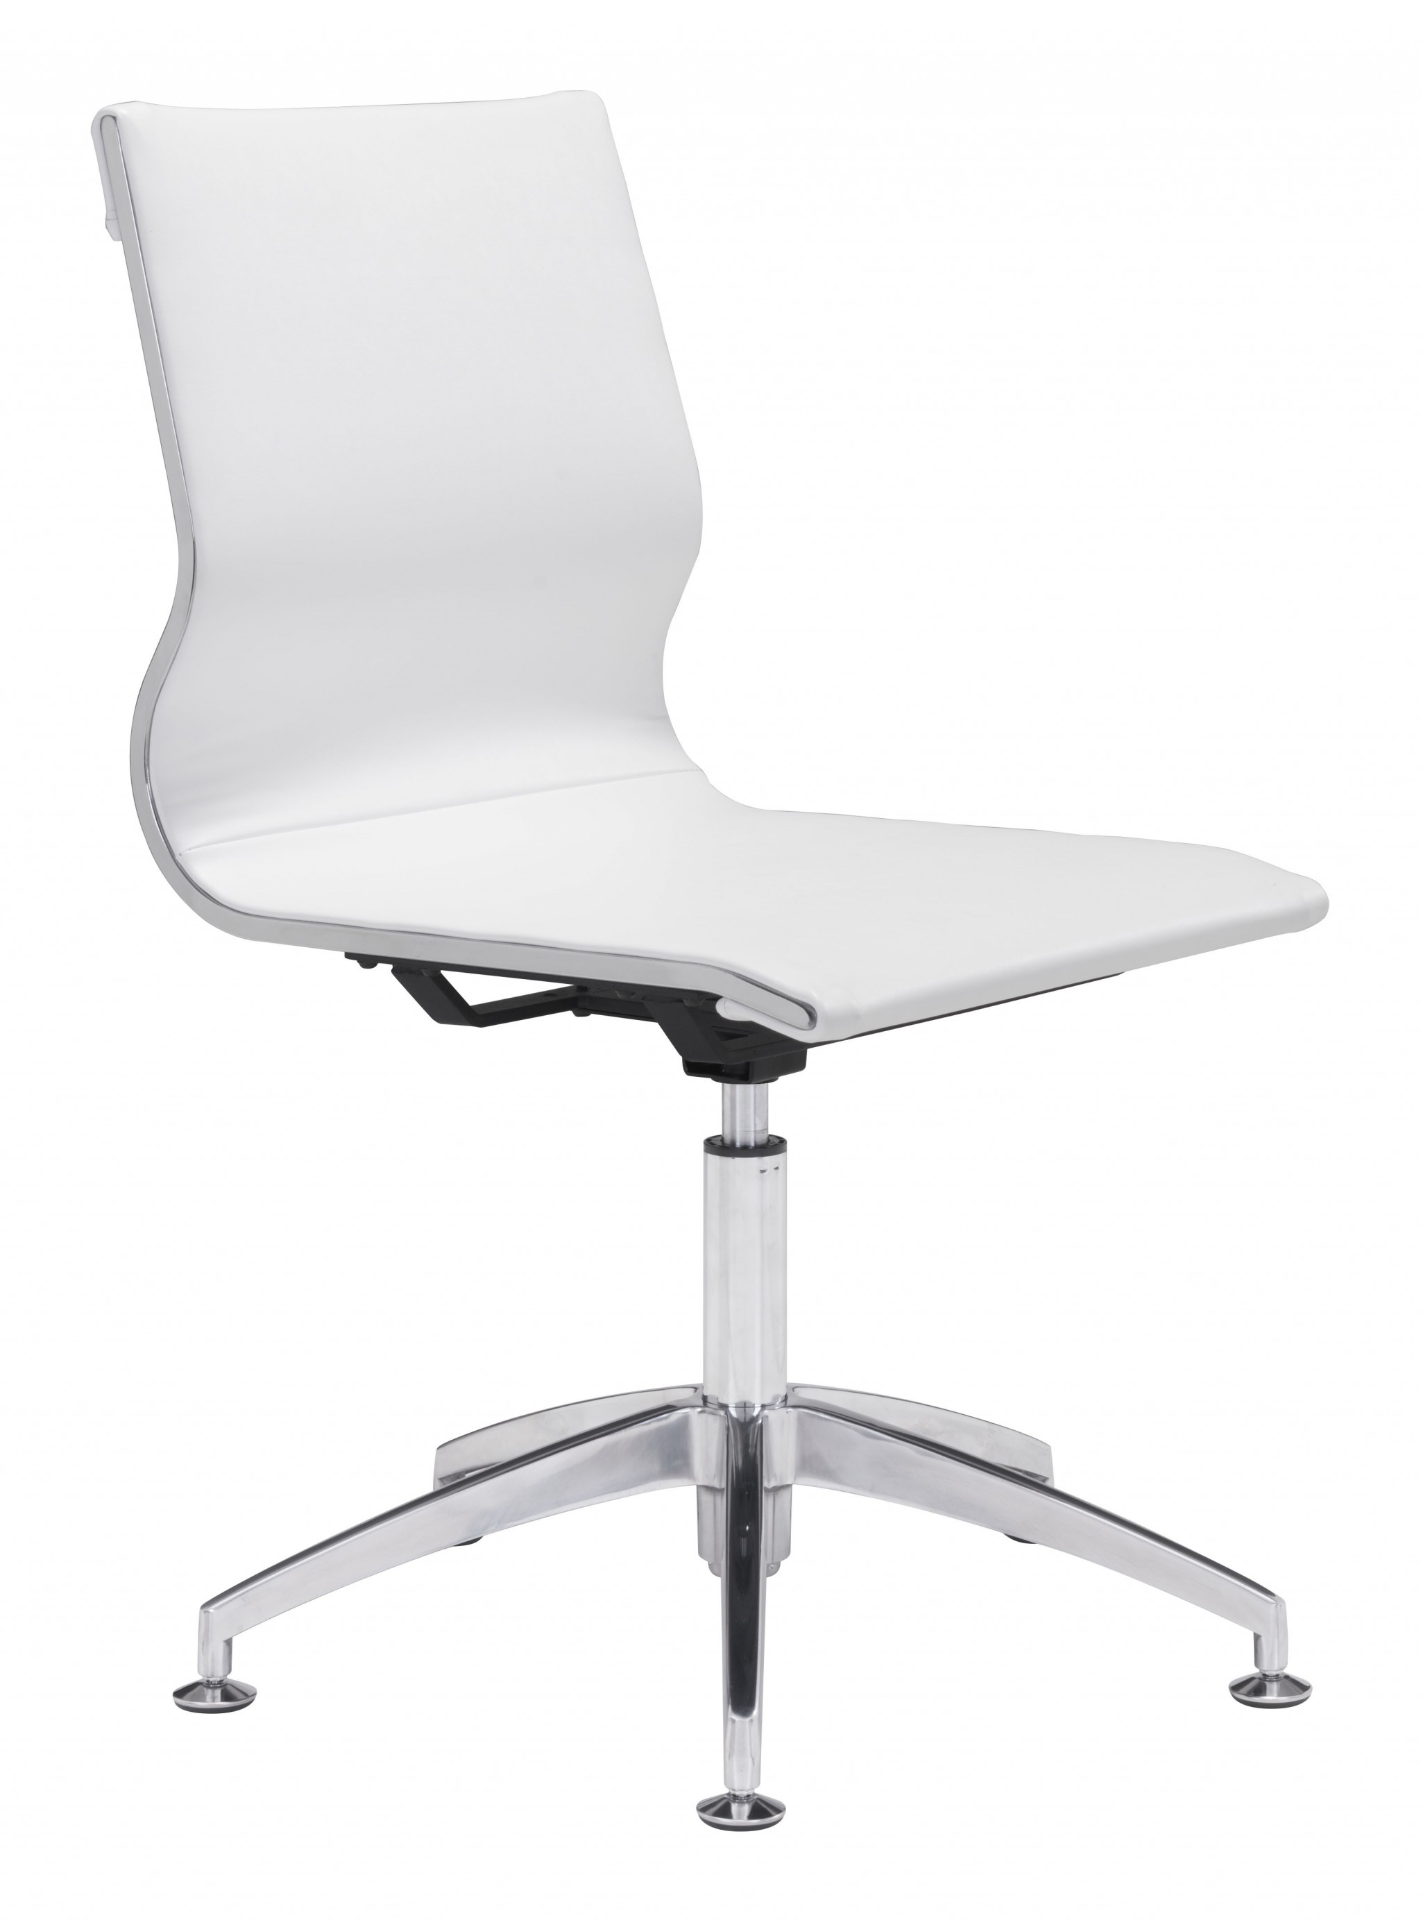 Ergonomic Conference Room Office Chair - White Higher Gallery Home Office